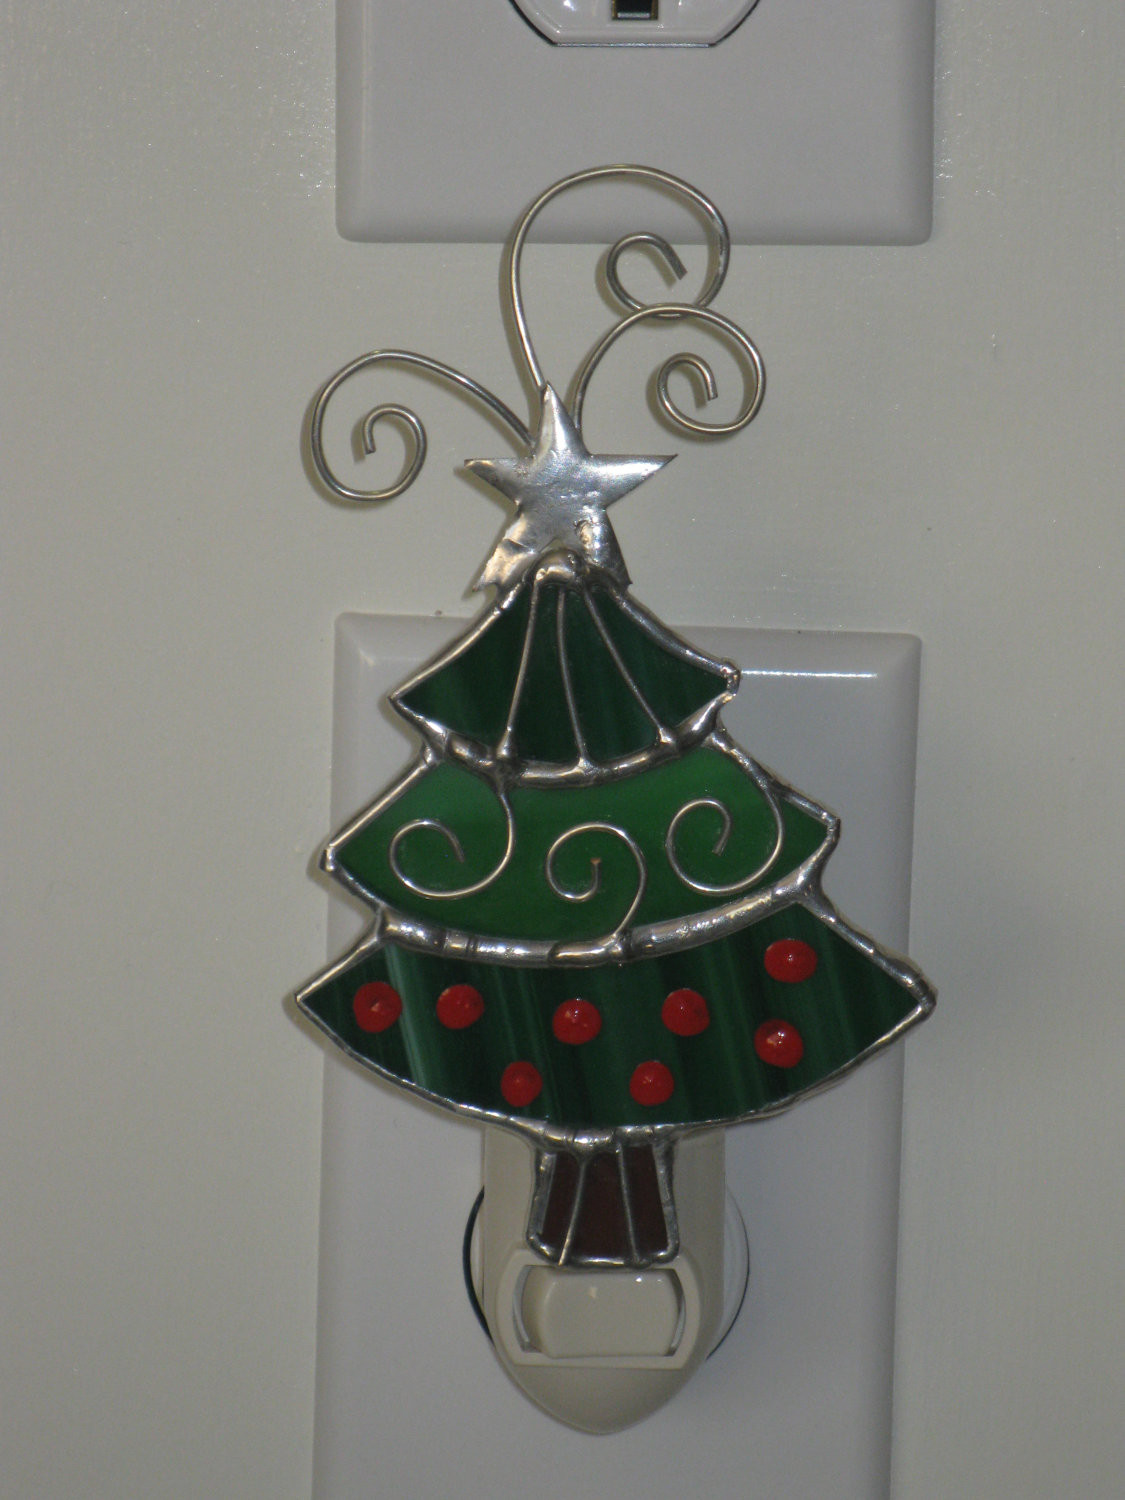 Stained Glass Christmas Tree Lamp
 Items similar to Stained Glass Christmas Tree Night Light